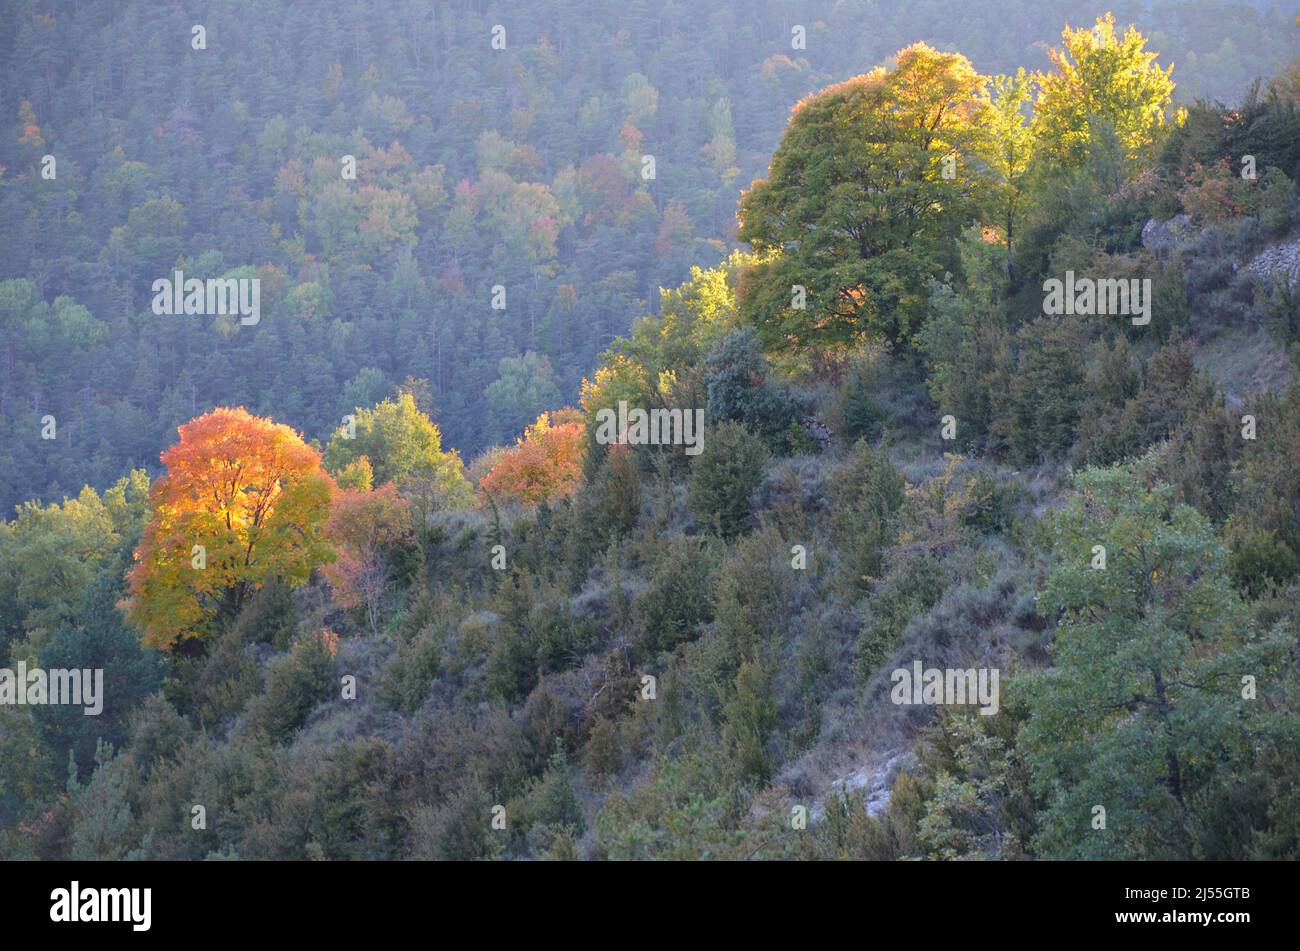 Autumn colors in the mixed mountain forests of the Ordesa-Viñamala Biosphere Reserve, Pyrenees Stock Photo